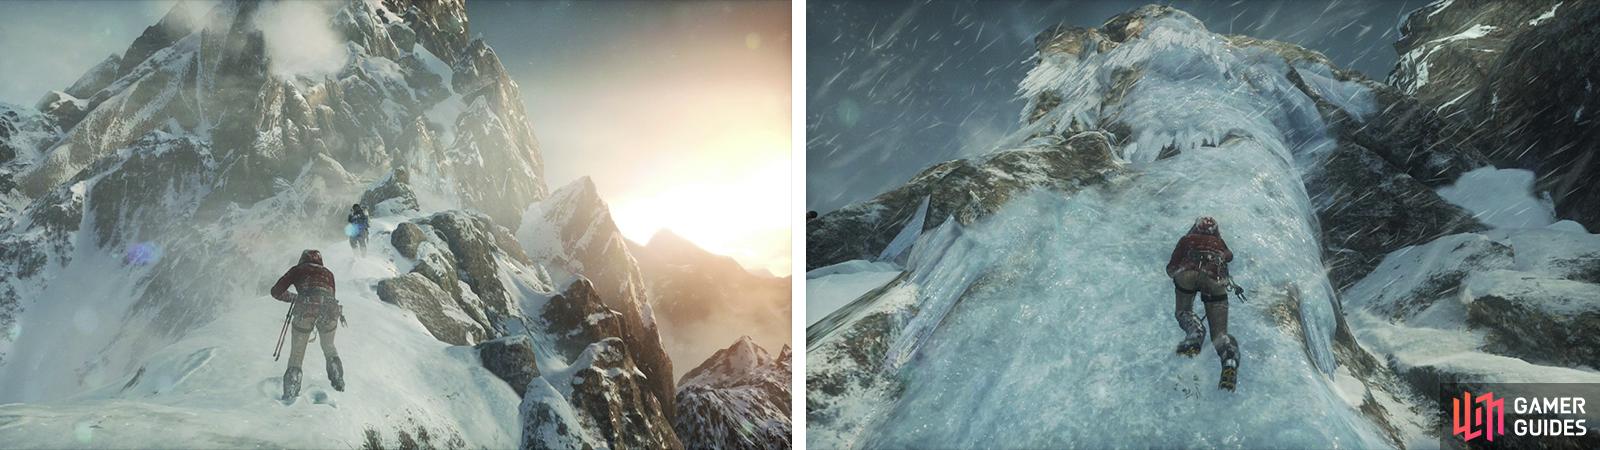 Follow Jonah along the path (left). Climb back up to him when lara loses her footing (right).